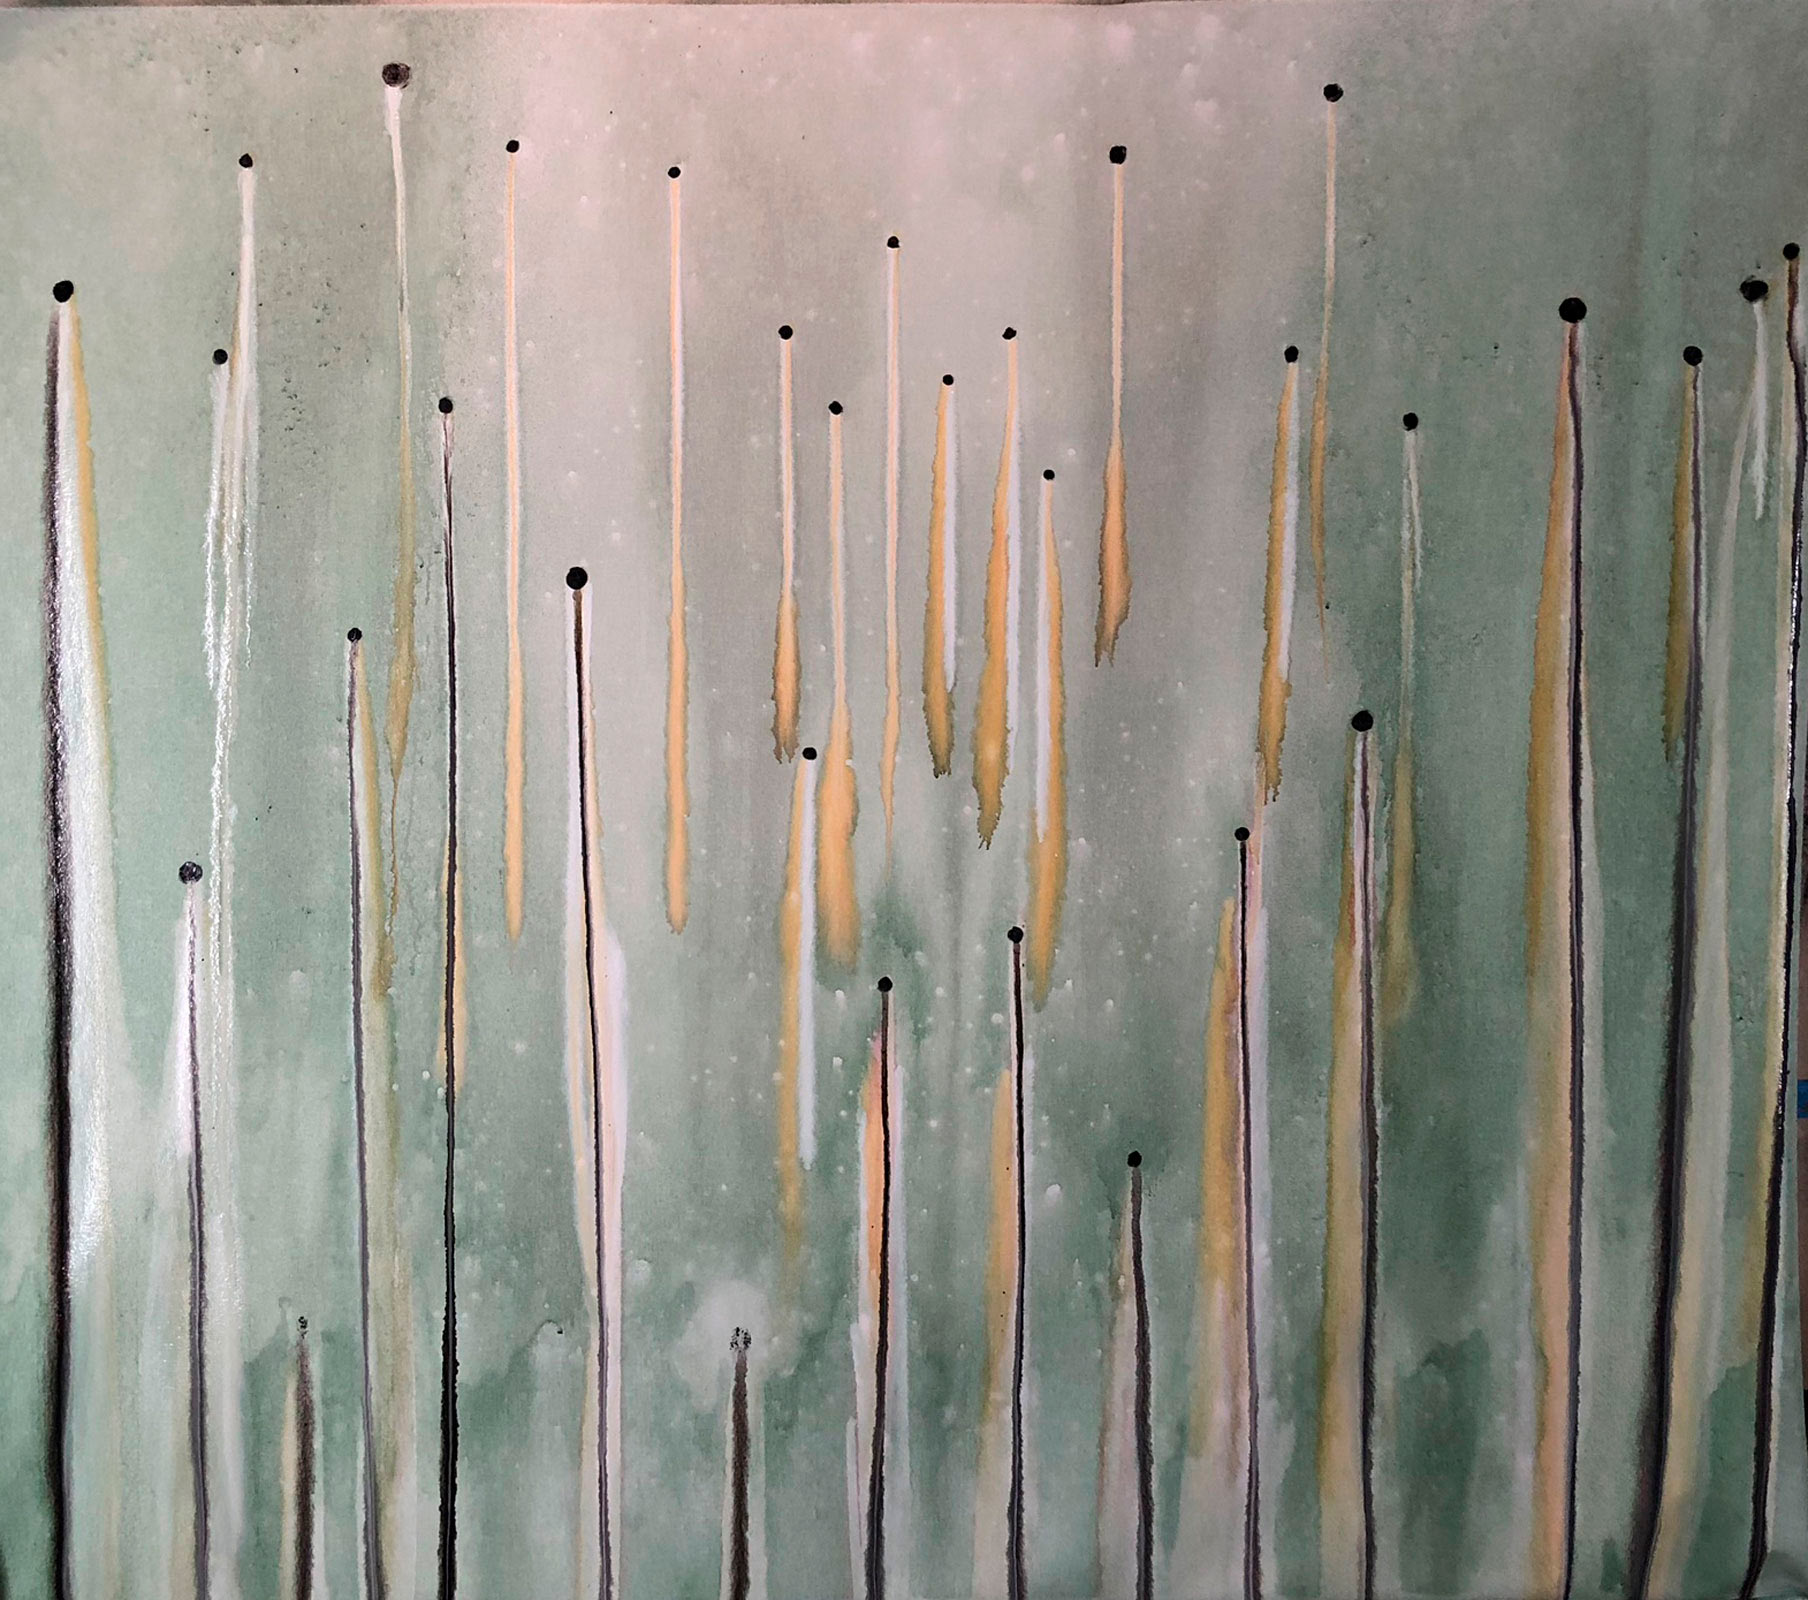 Seeds Bring Life, 2018, acrylic on canvas, 5.5 x 5 ft, SOLD